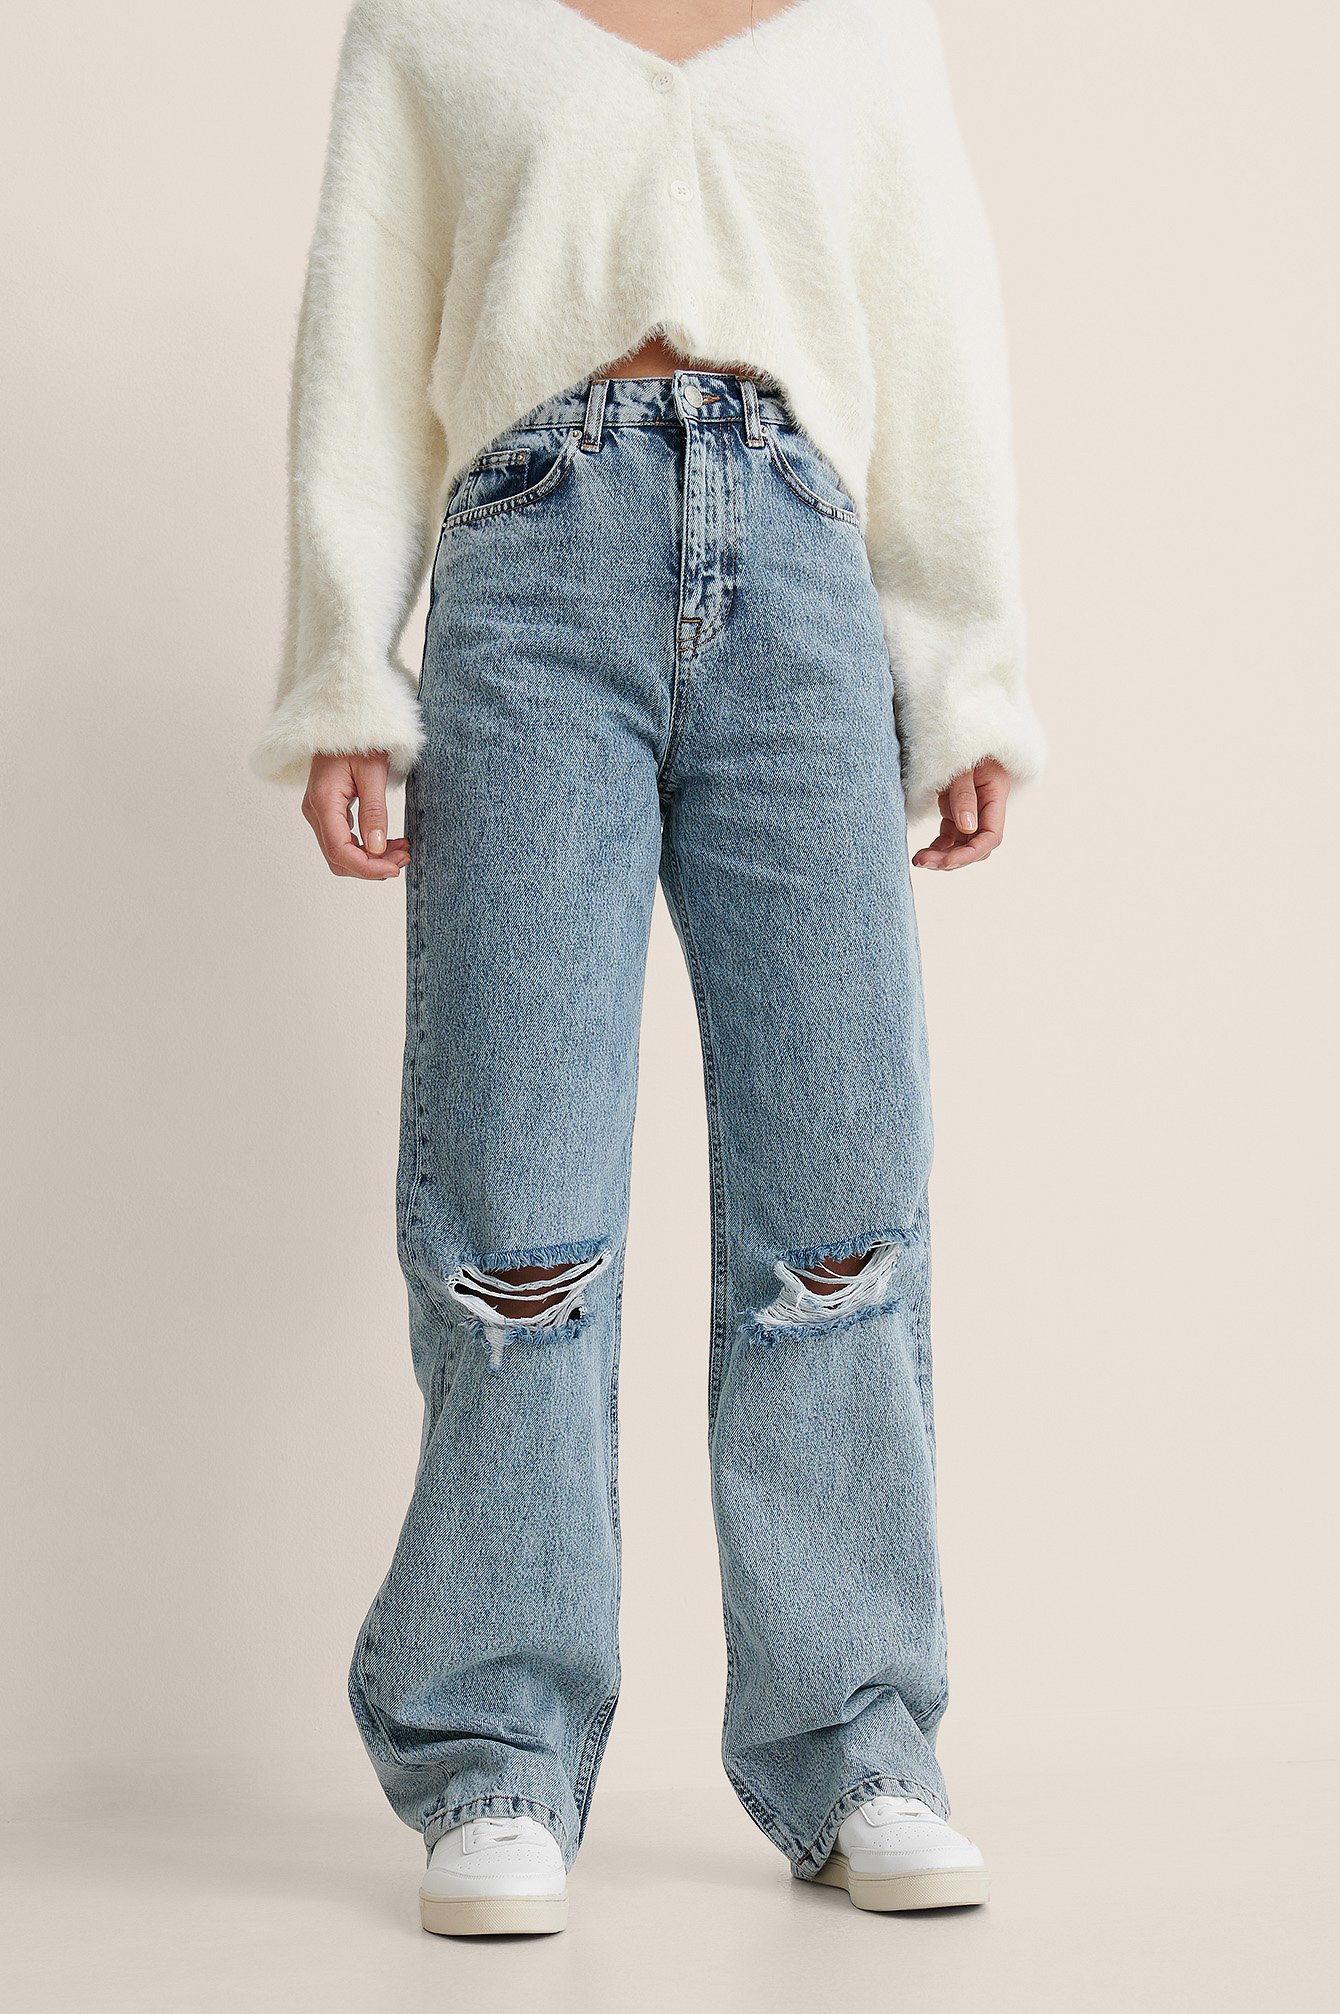 Gedachte Oneindigheid sector Ripped jeans • Dames ripped jeans online kopen | NA-KD